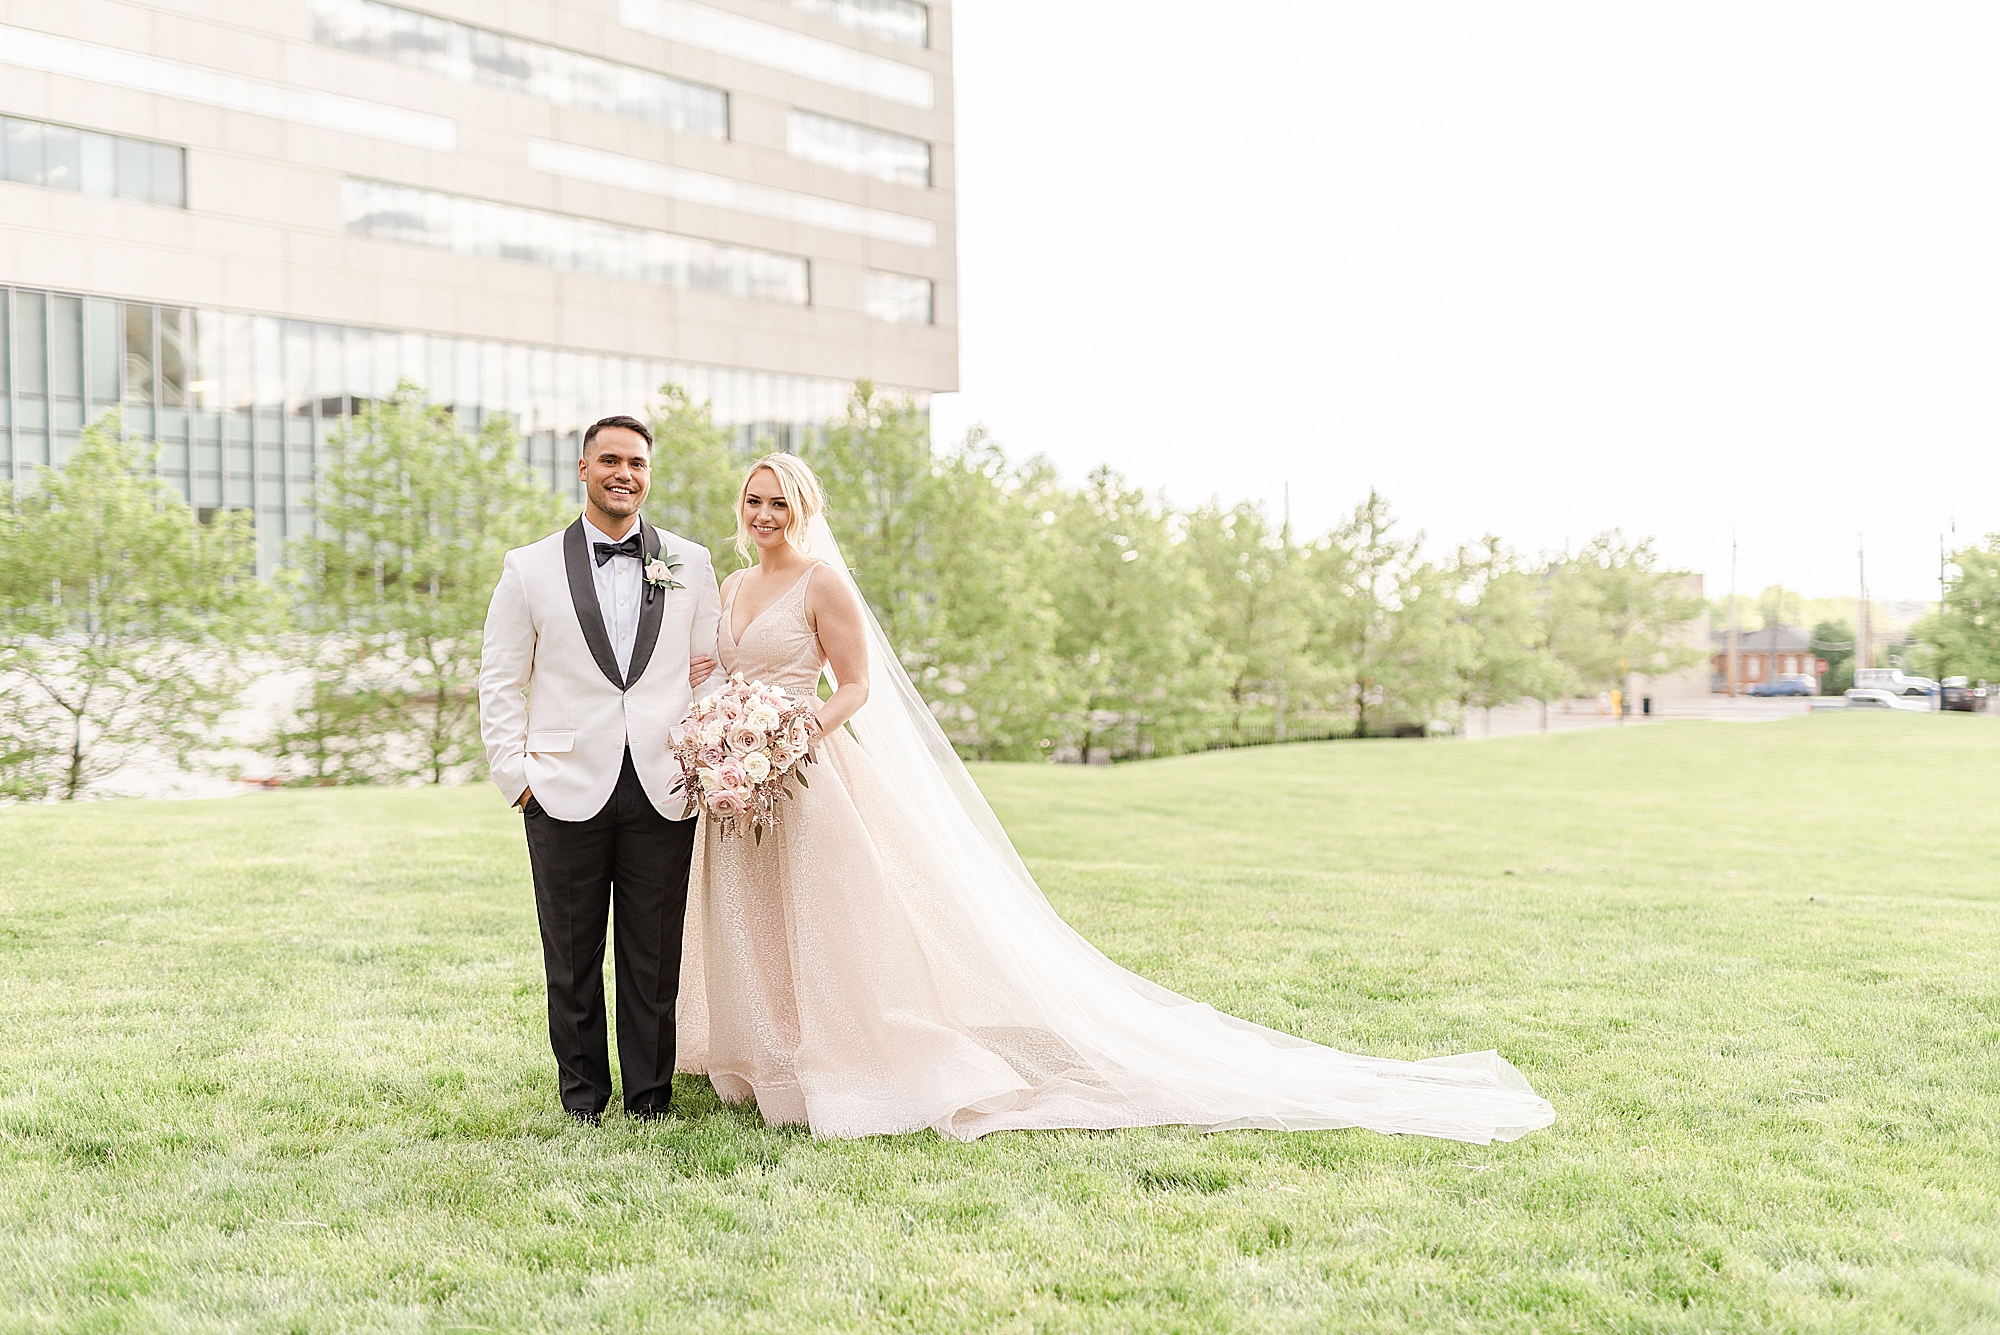 Westin Southern Columbus wedding portraits of bride and groom